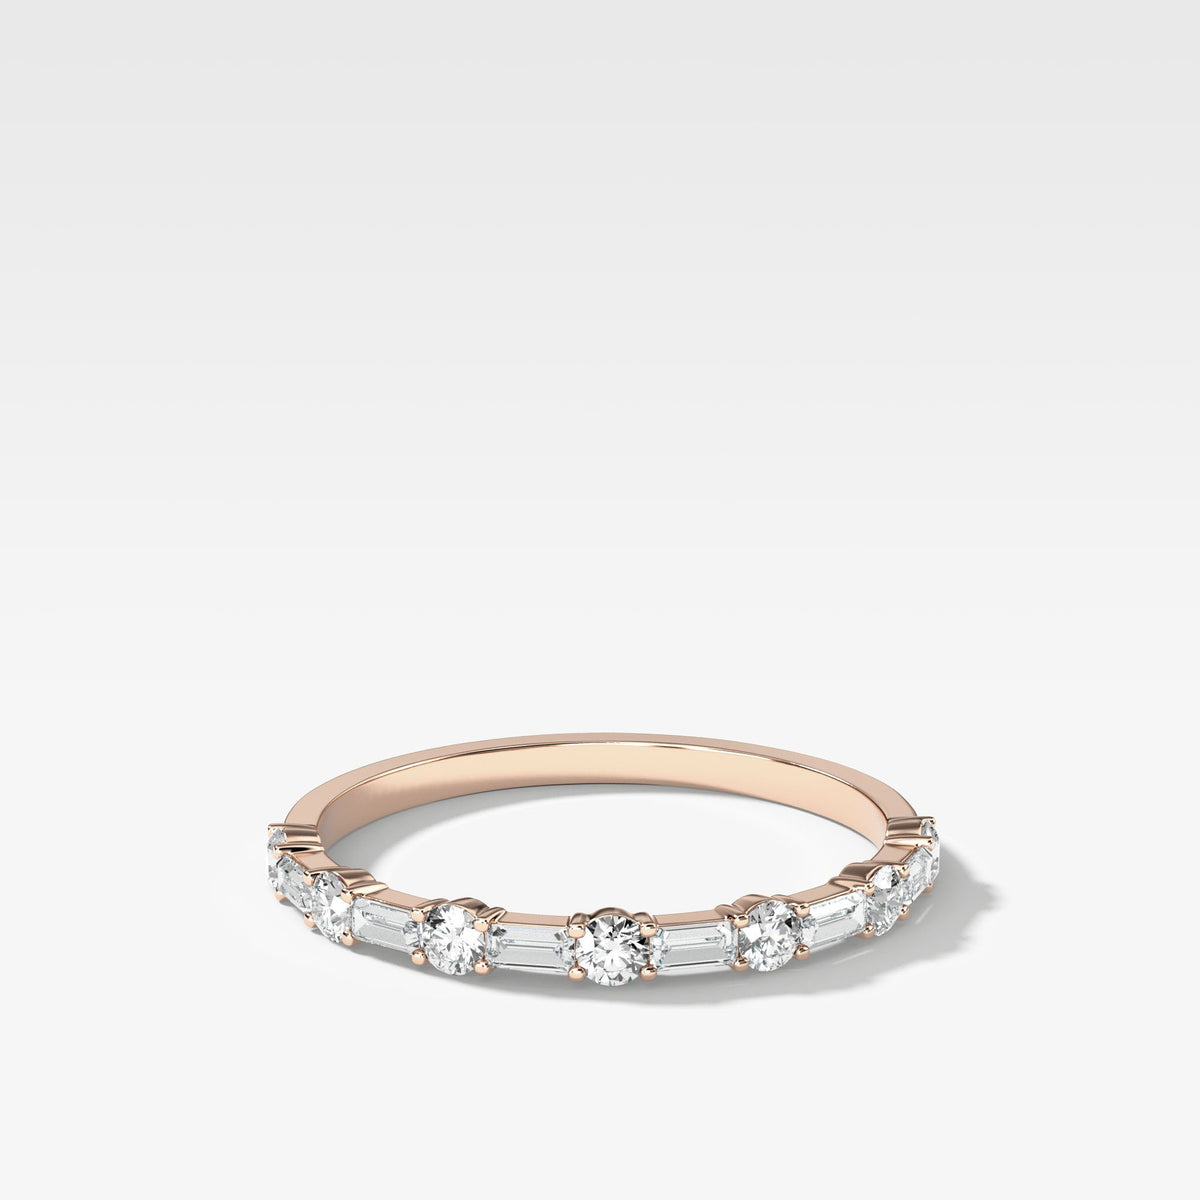 Scorpio Baguette Diamond Wedding Band by Good Stone in Rose Gold